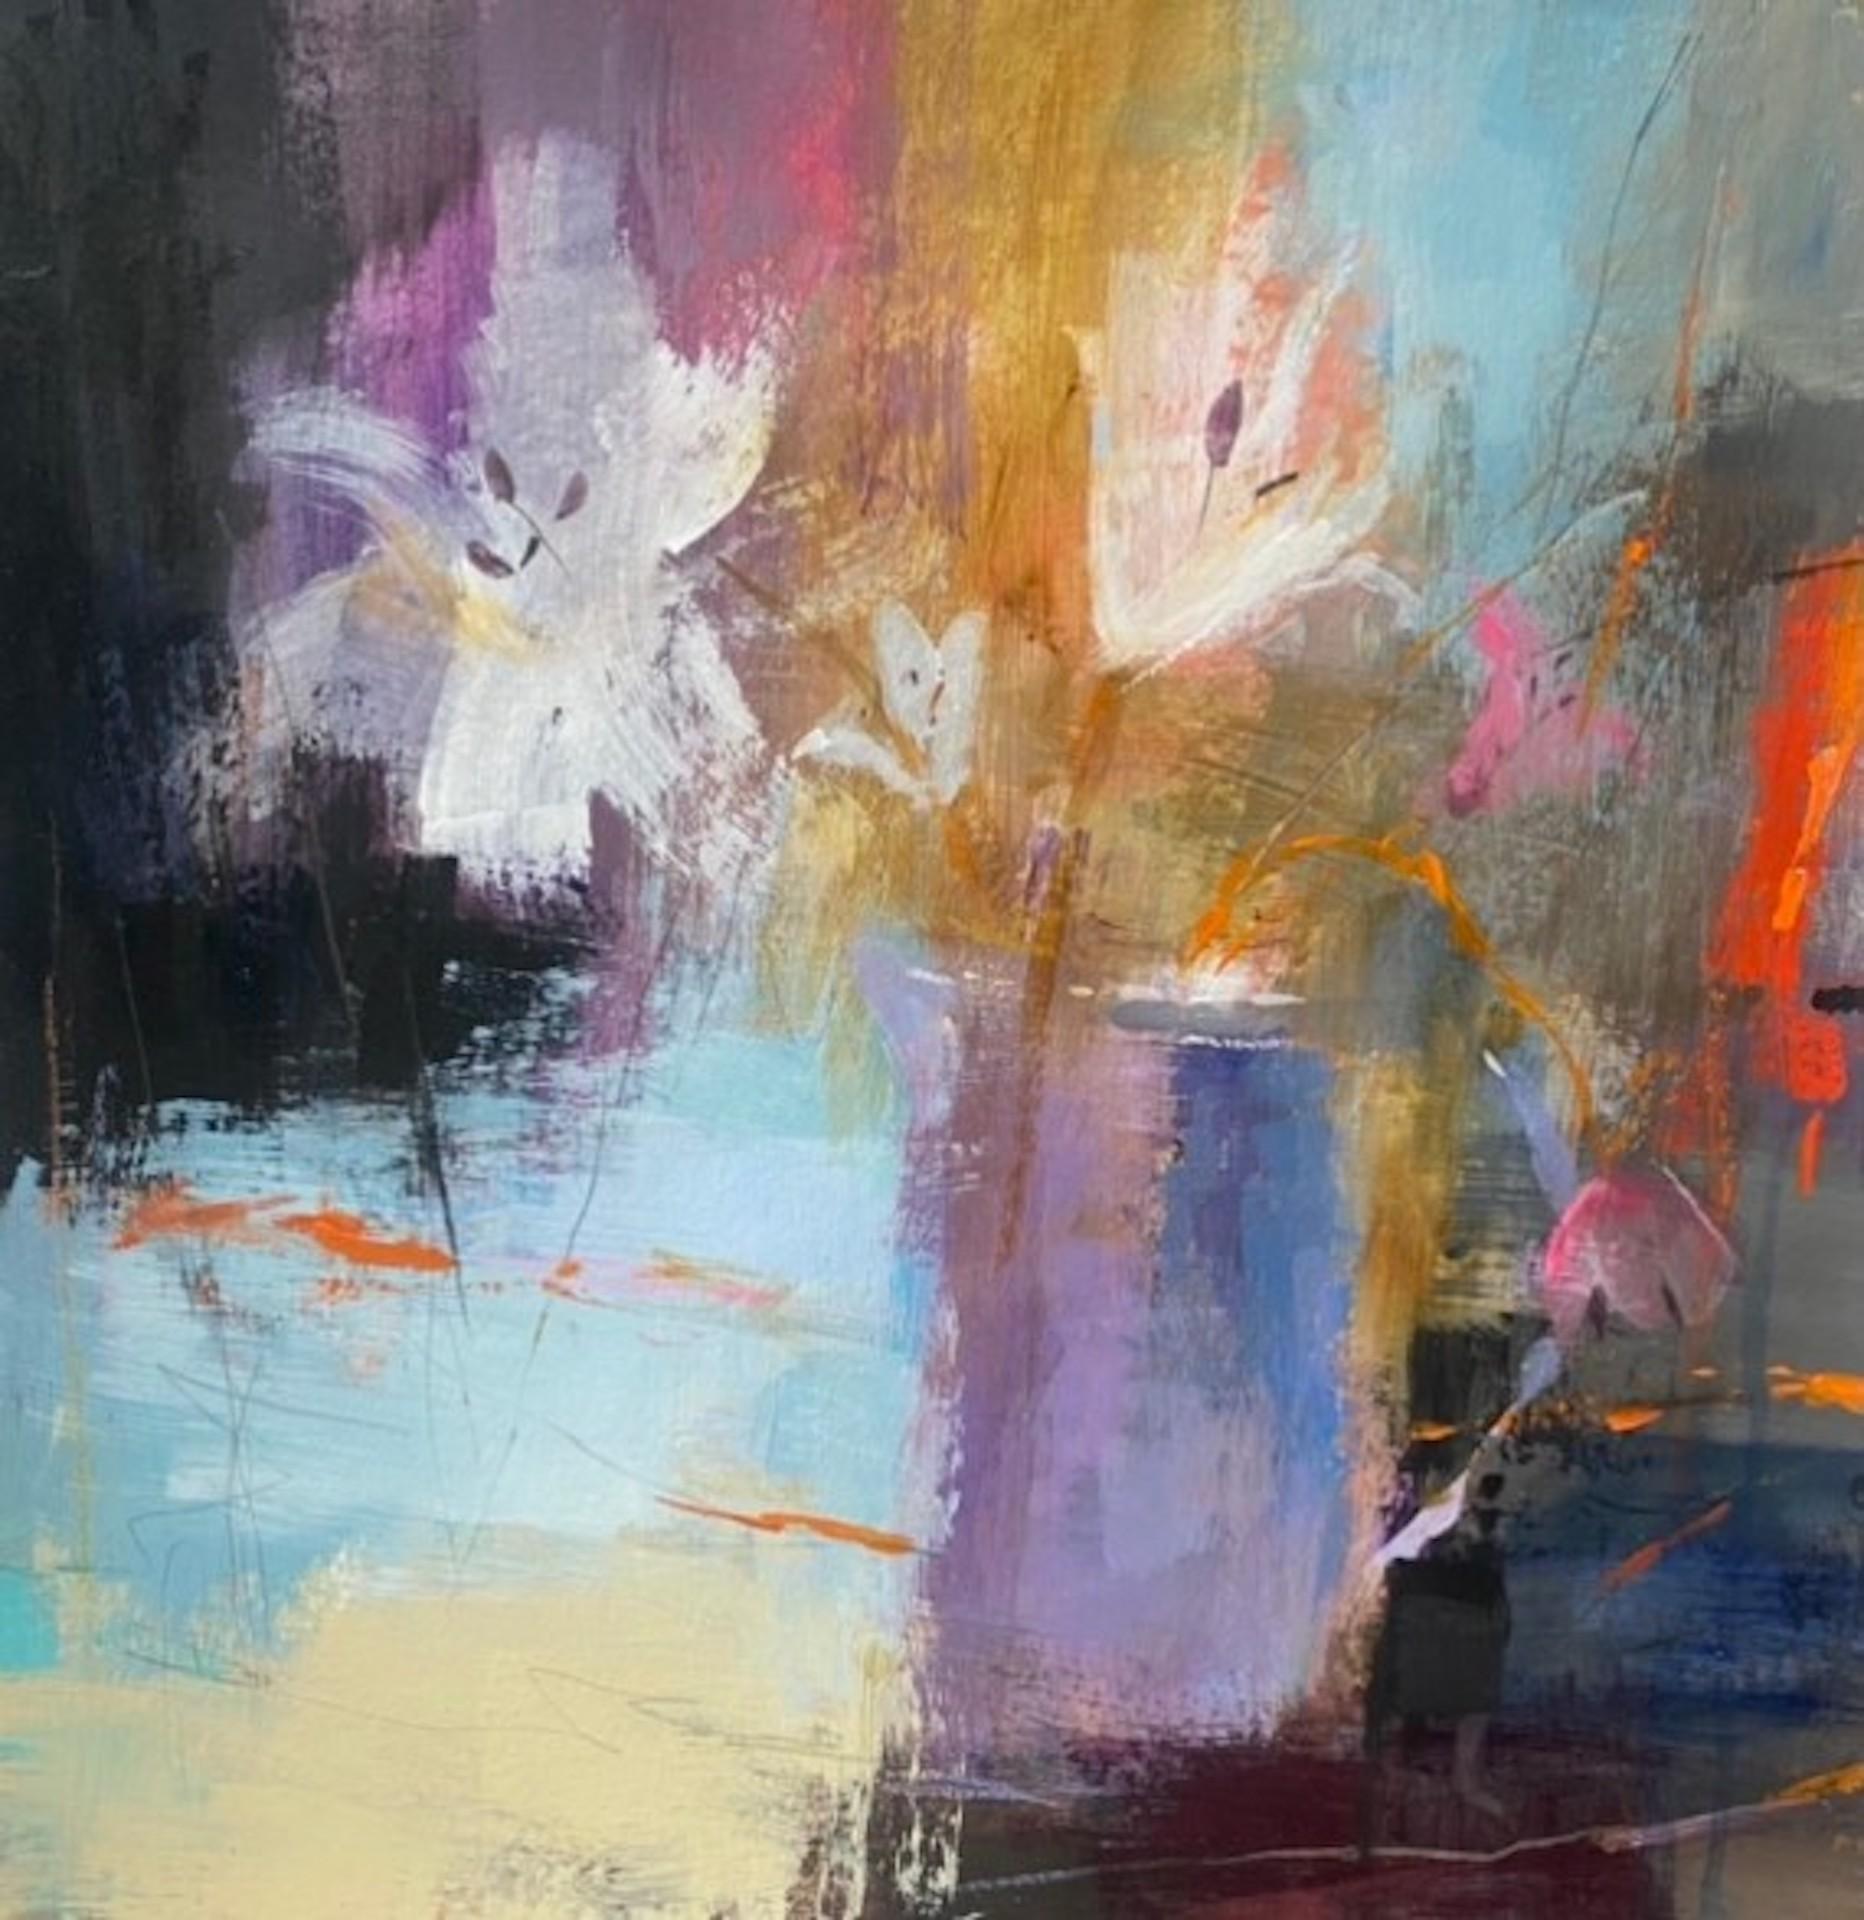 Abstracted Lilies With Orange, Luisa Holden, Original Mixed Media Painting